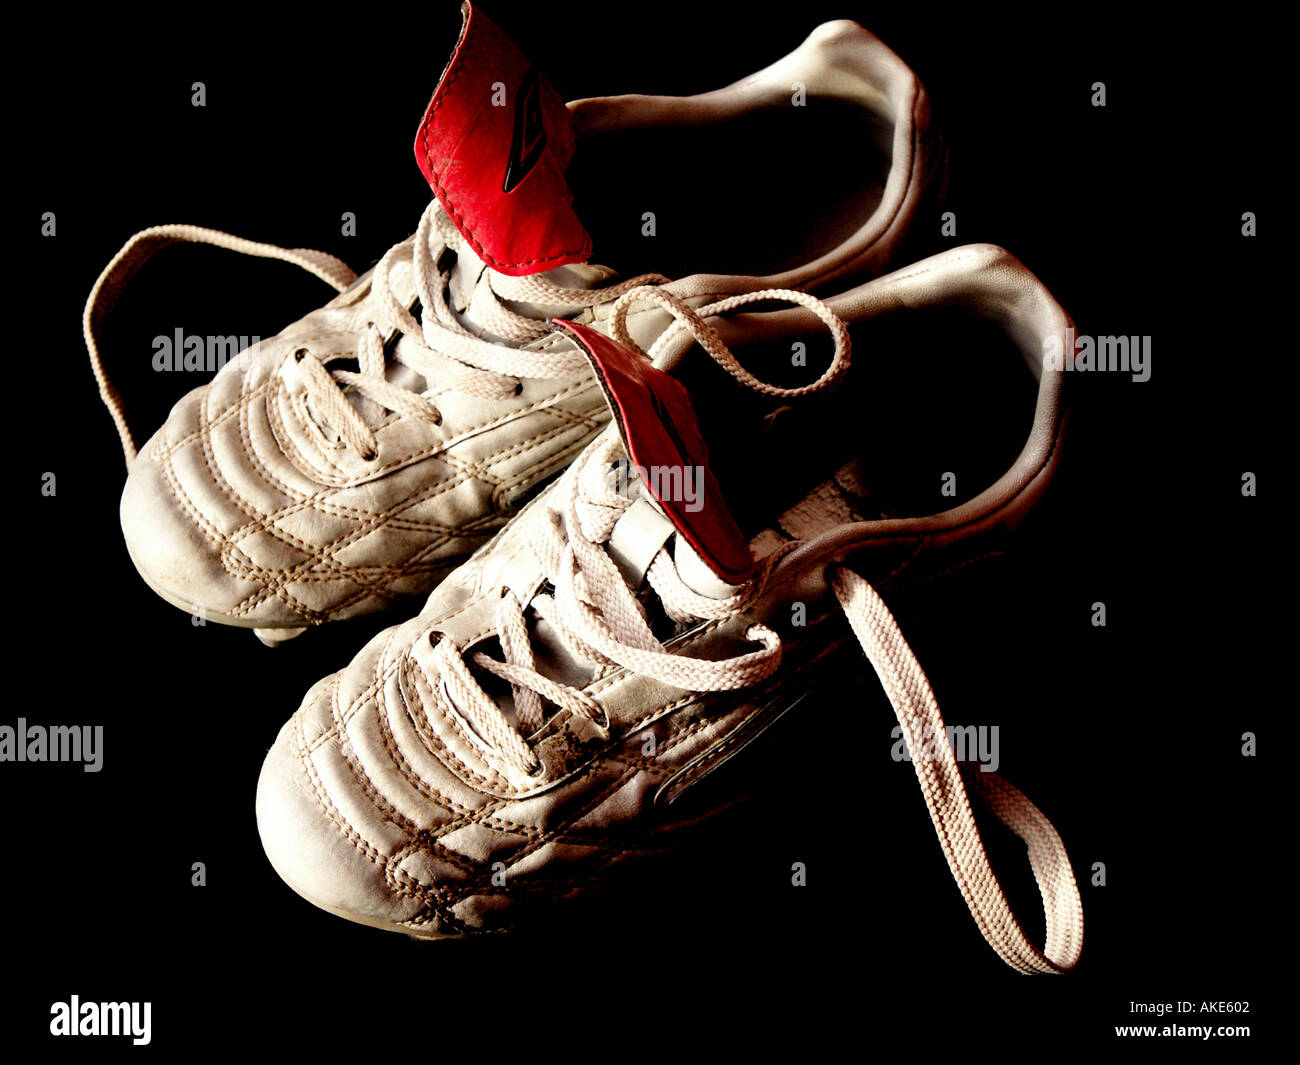 boot football pair set twin together laces leather worn stud soccer shoe  game 2 two together silver white red tongue heel toe Stock Photo - Alamy